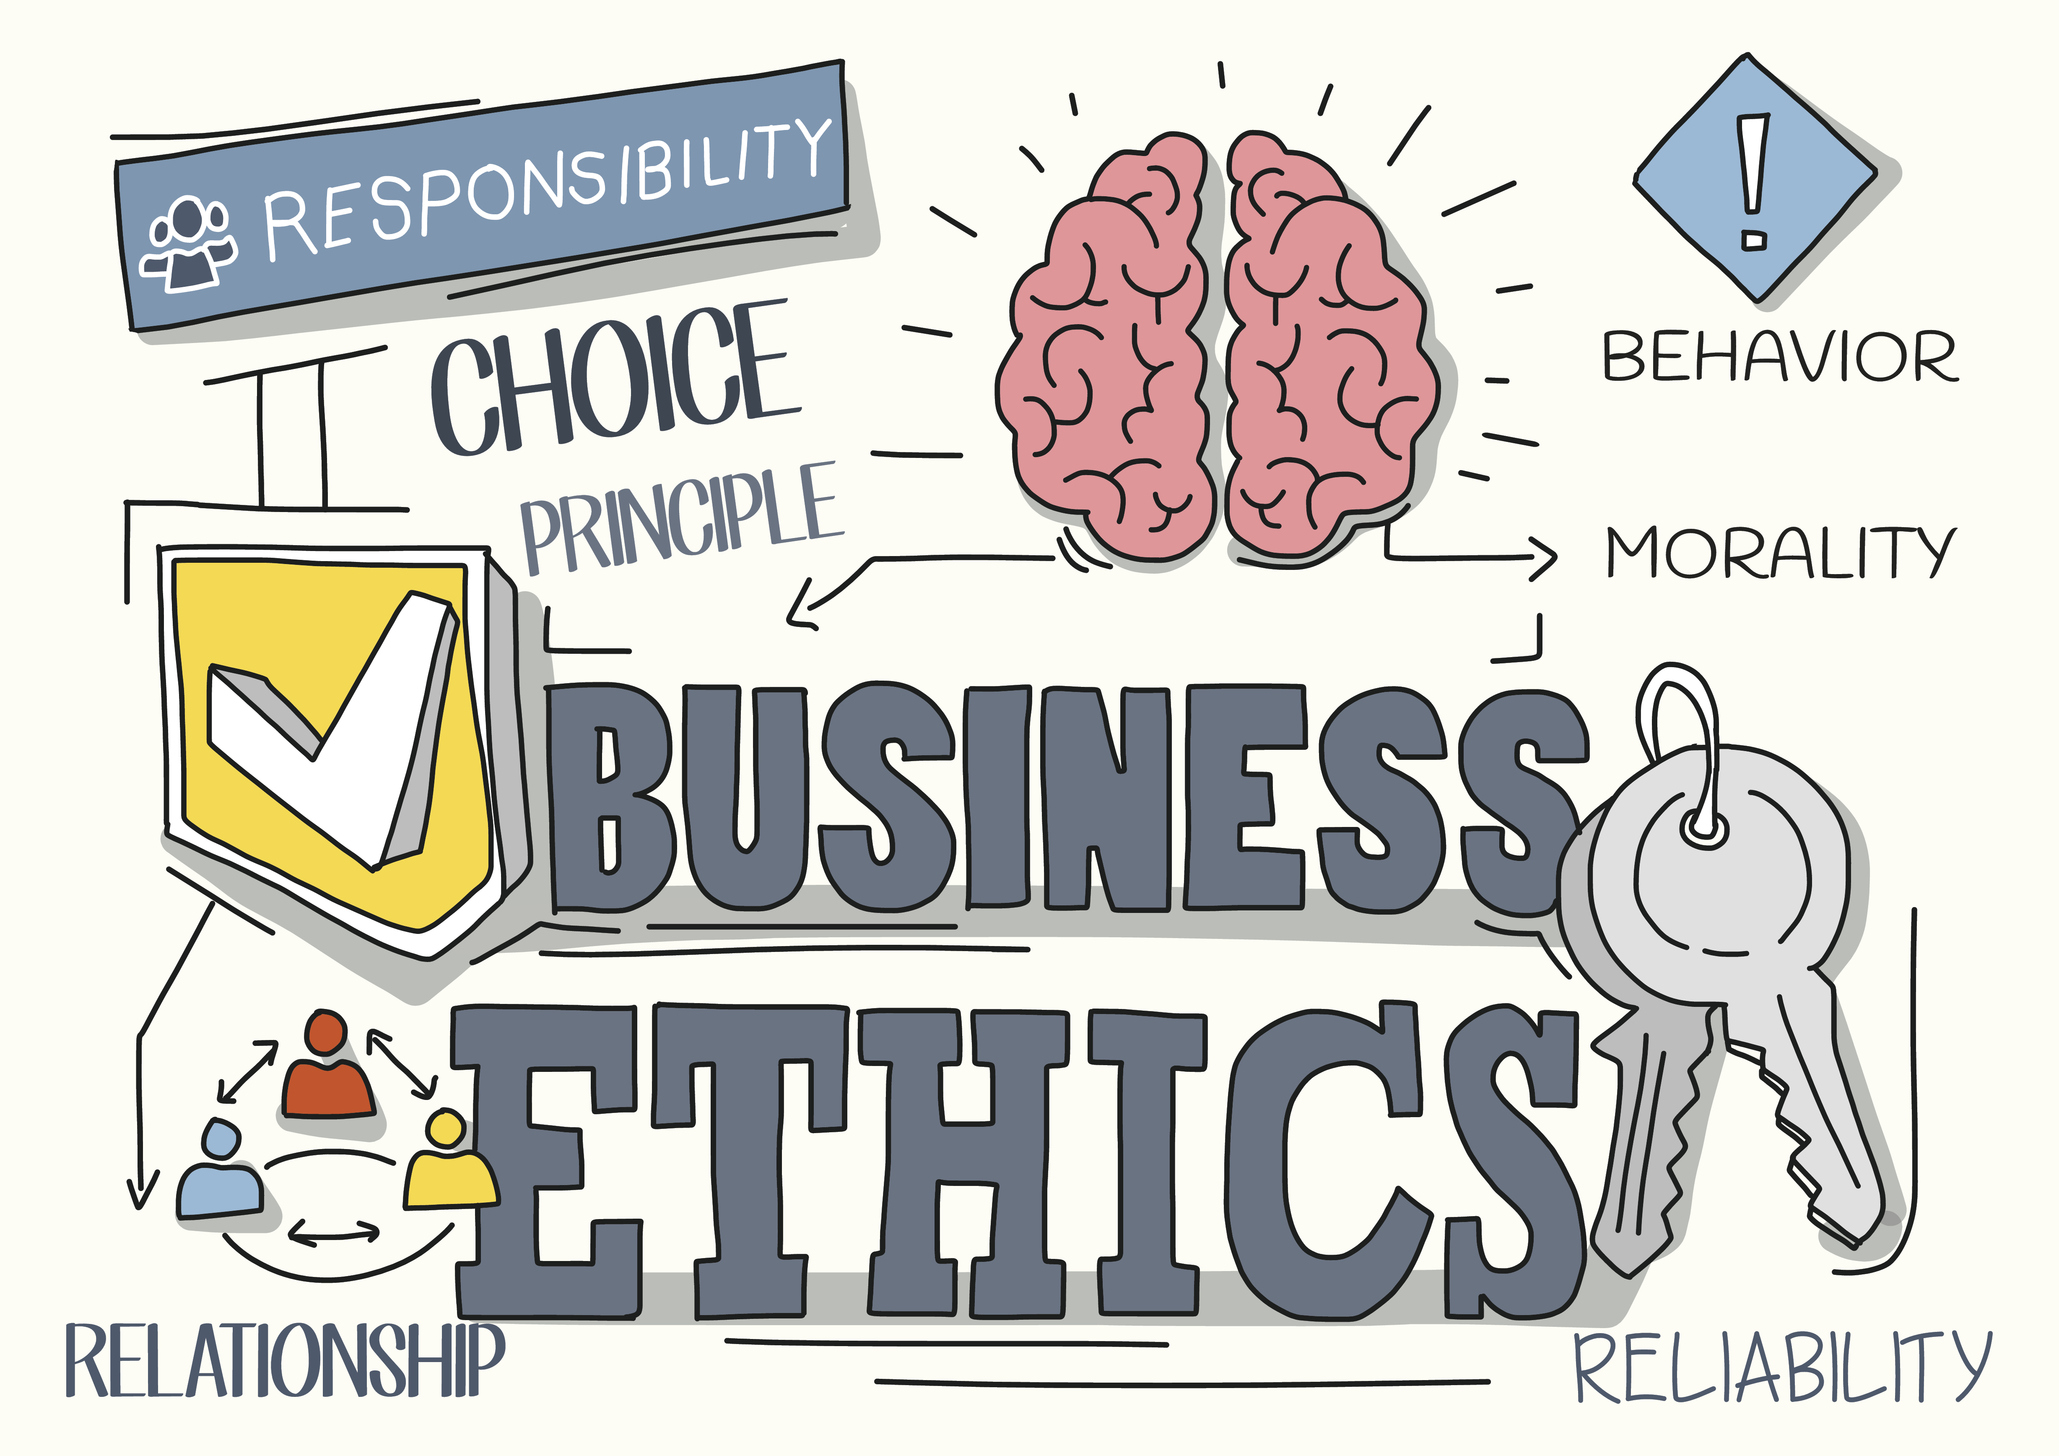 Building ethical relationships